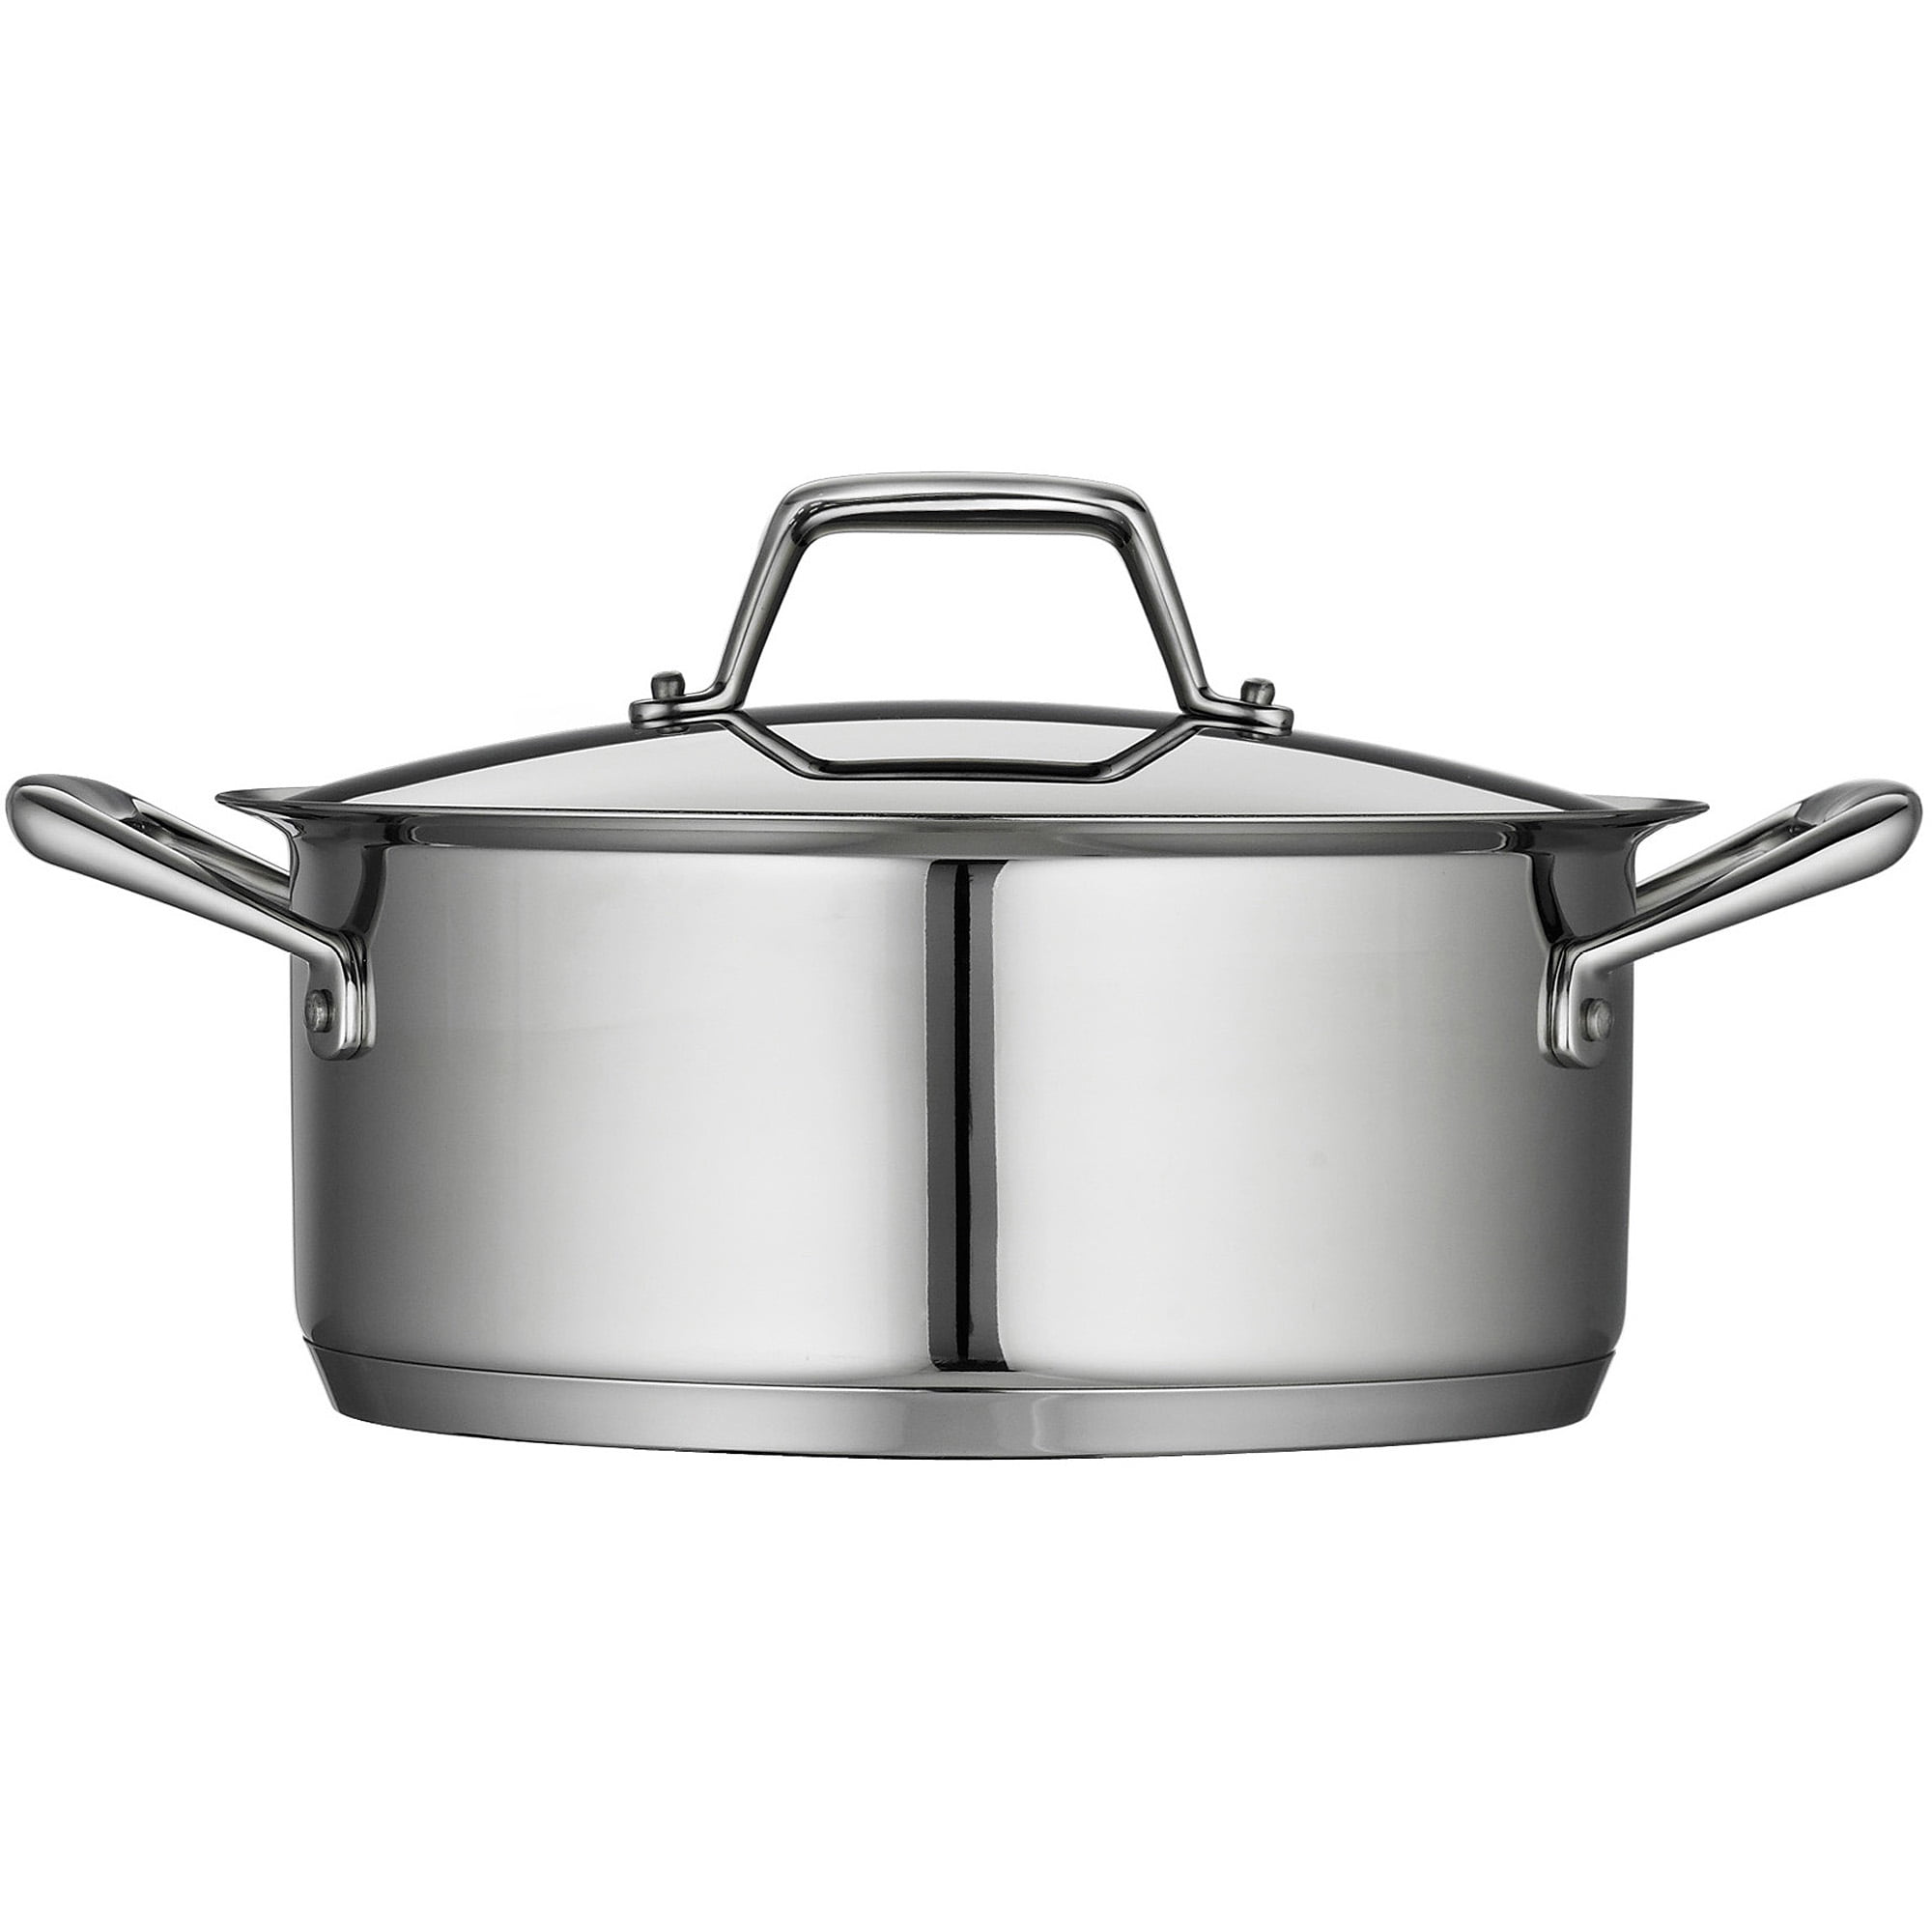 Tramontina Dutch Oven Aluminum Core Dishwasher Safe 5 Qt Stainless Steel Lid 